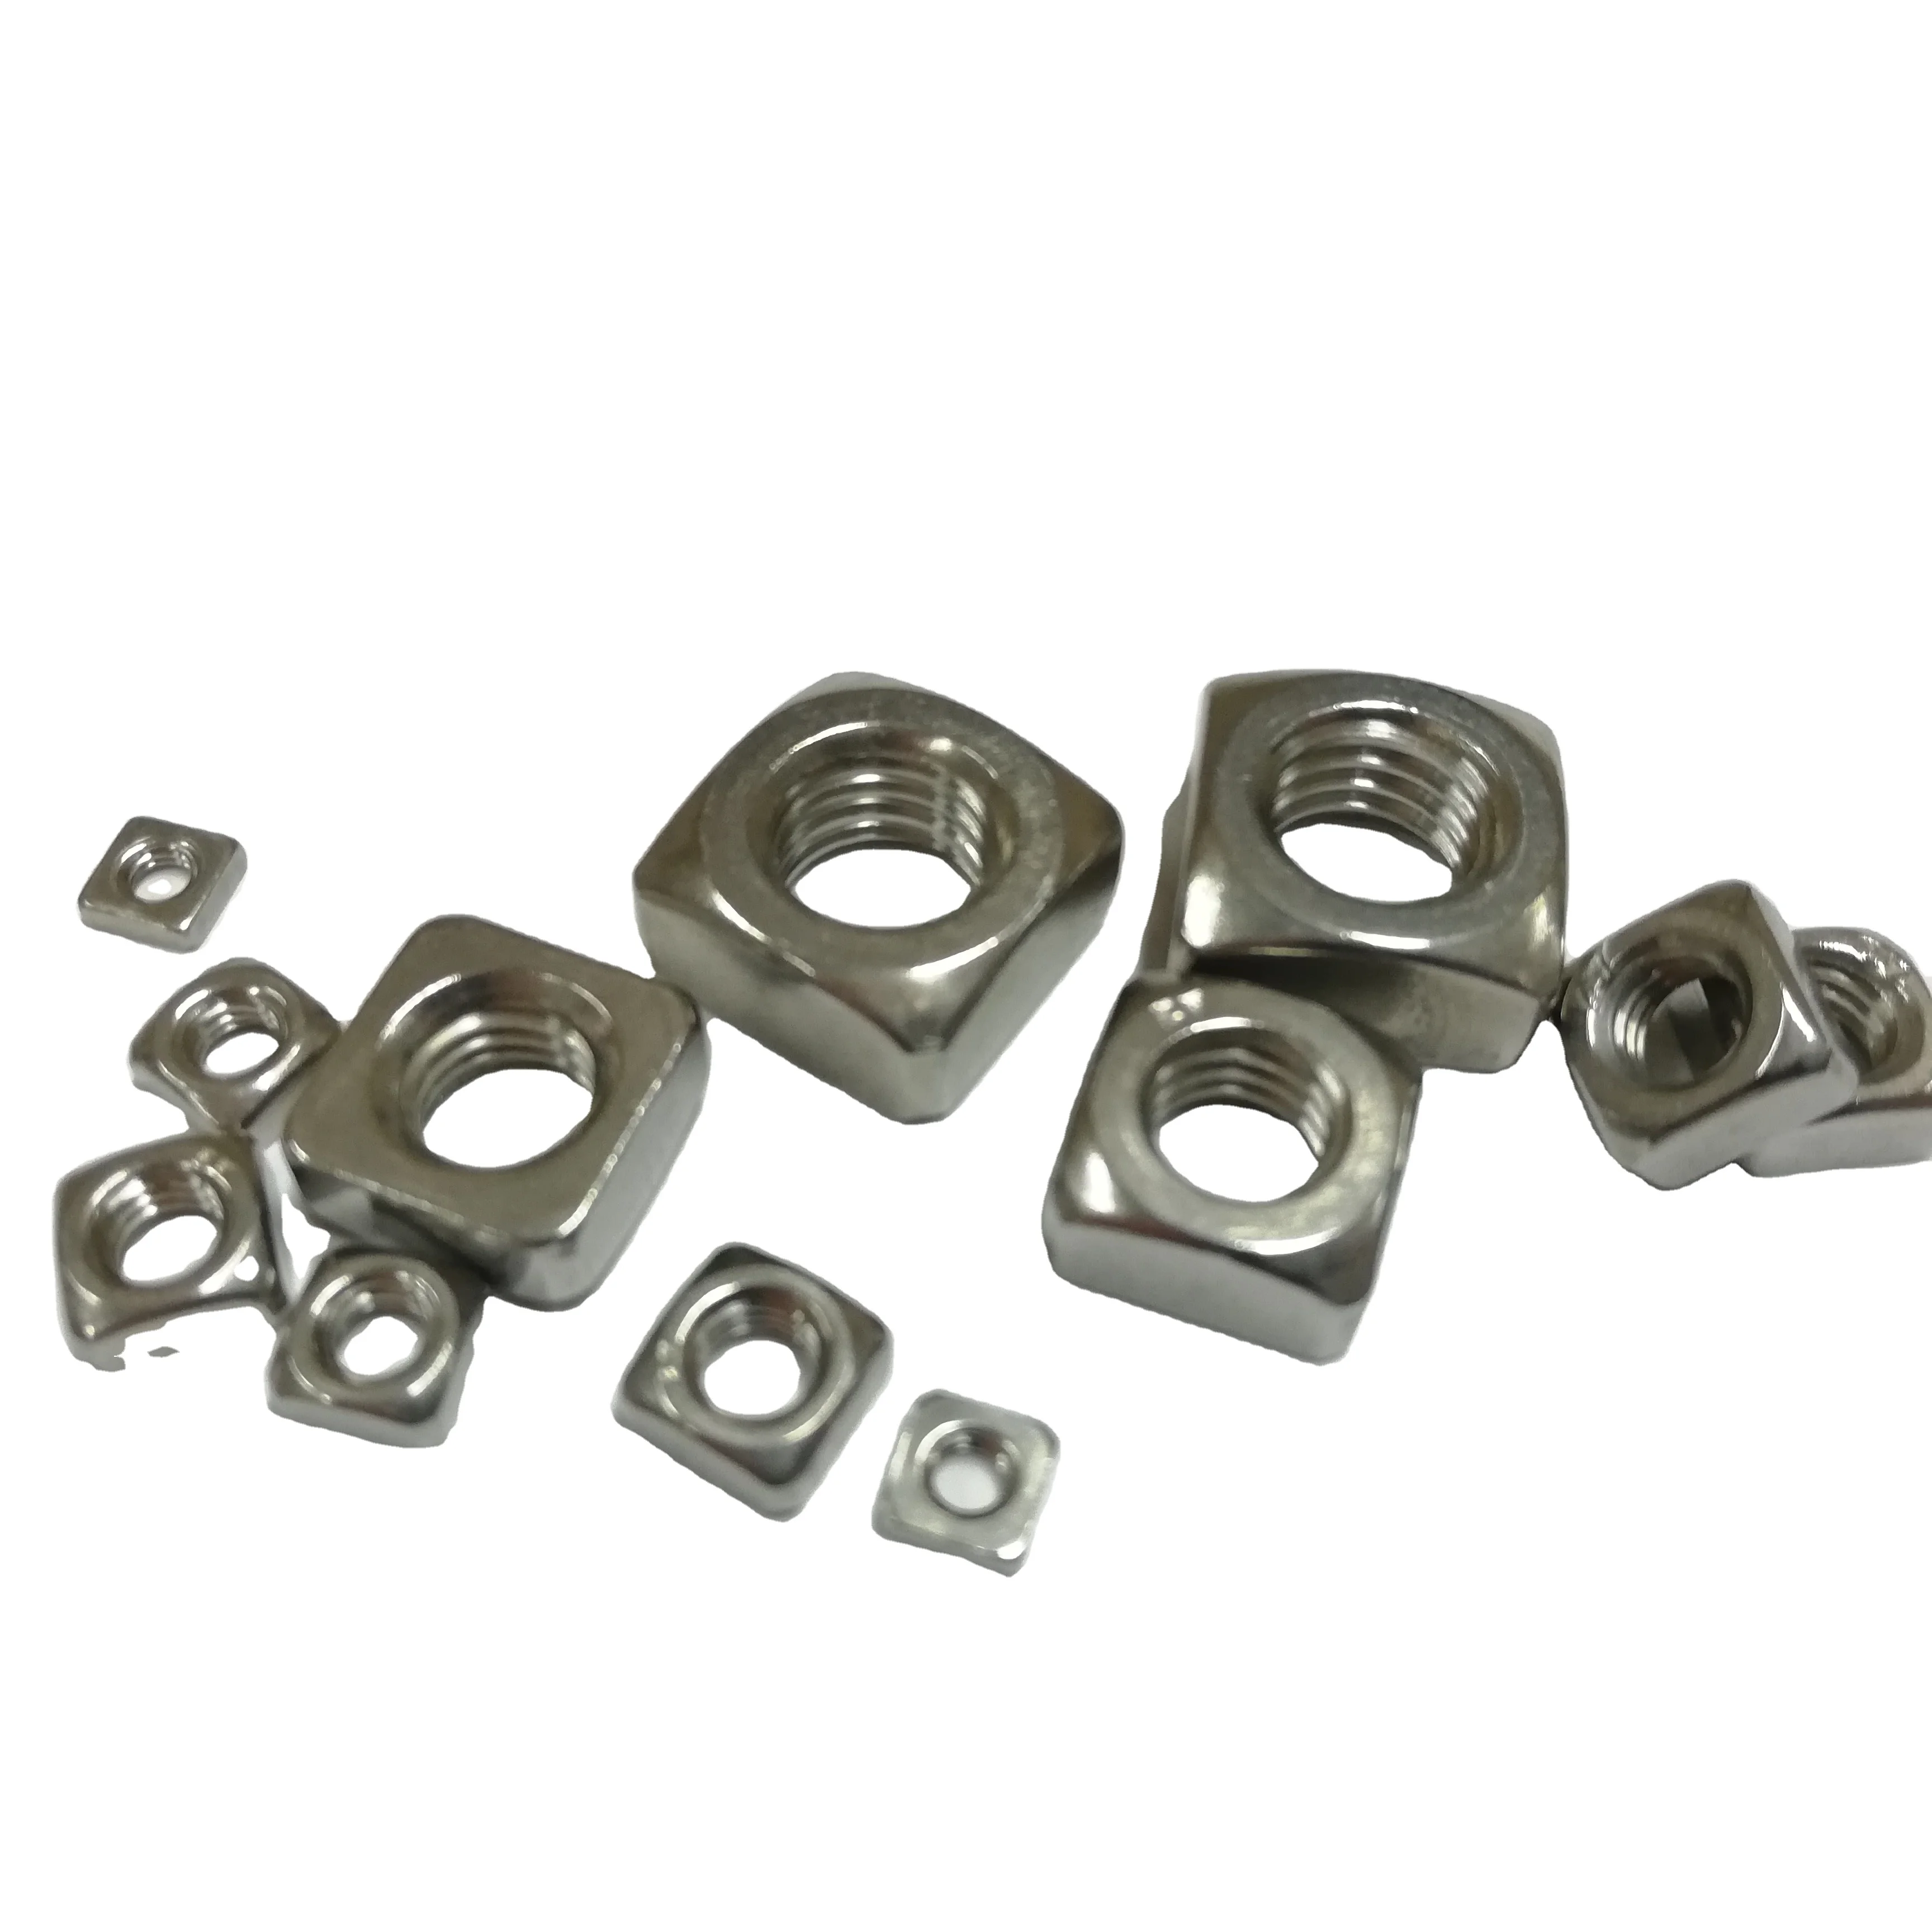 Coarse Hot Dip Galvanized Steel Square Nuts Four-Sided Nuts Select Size 